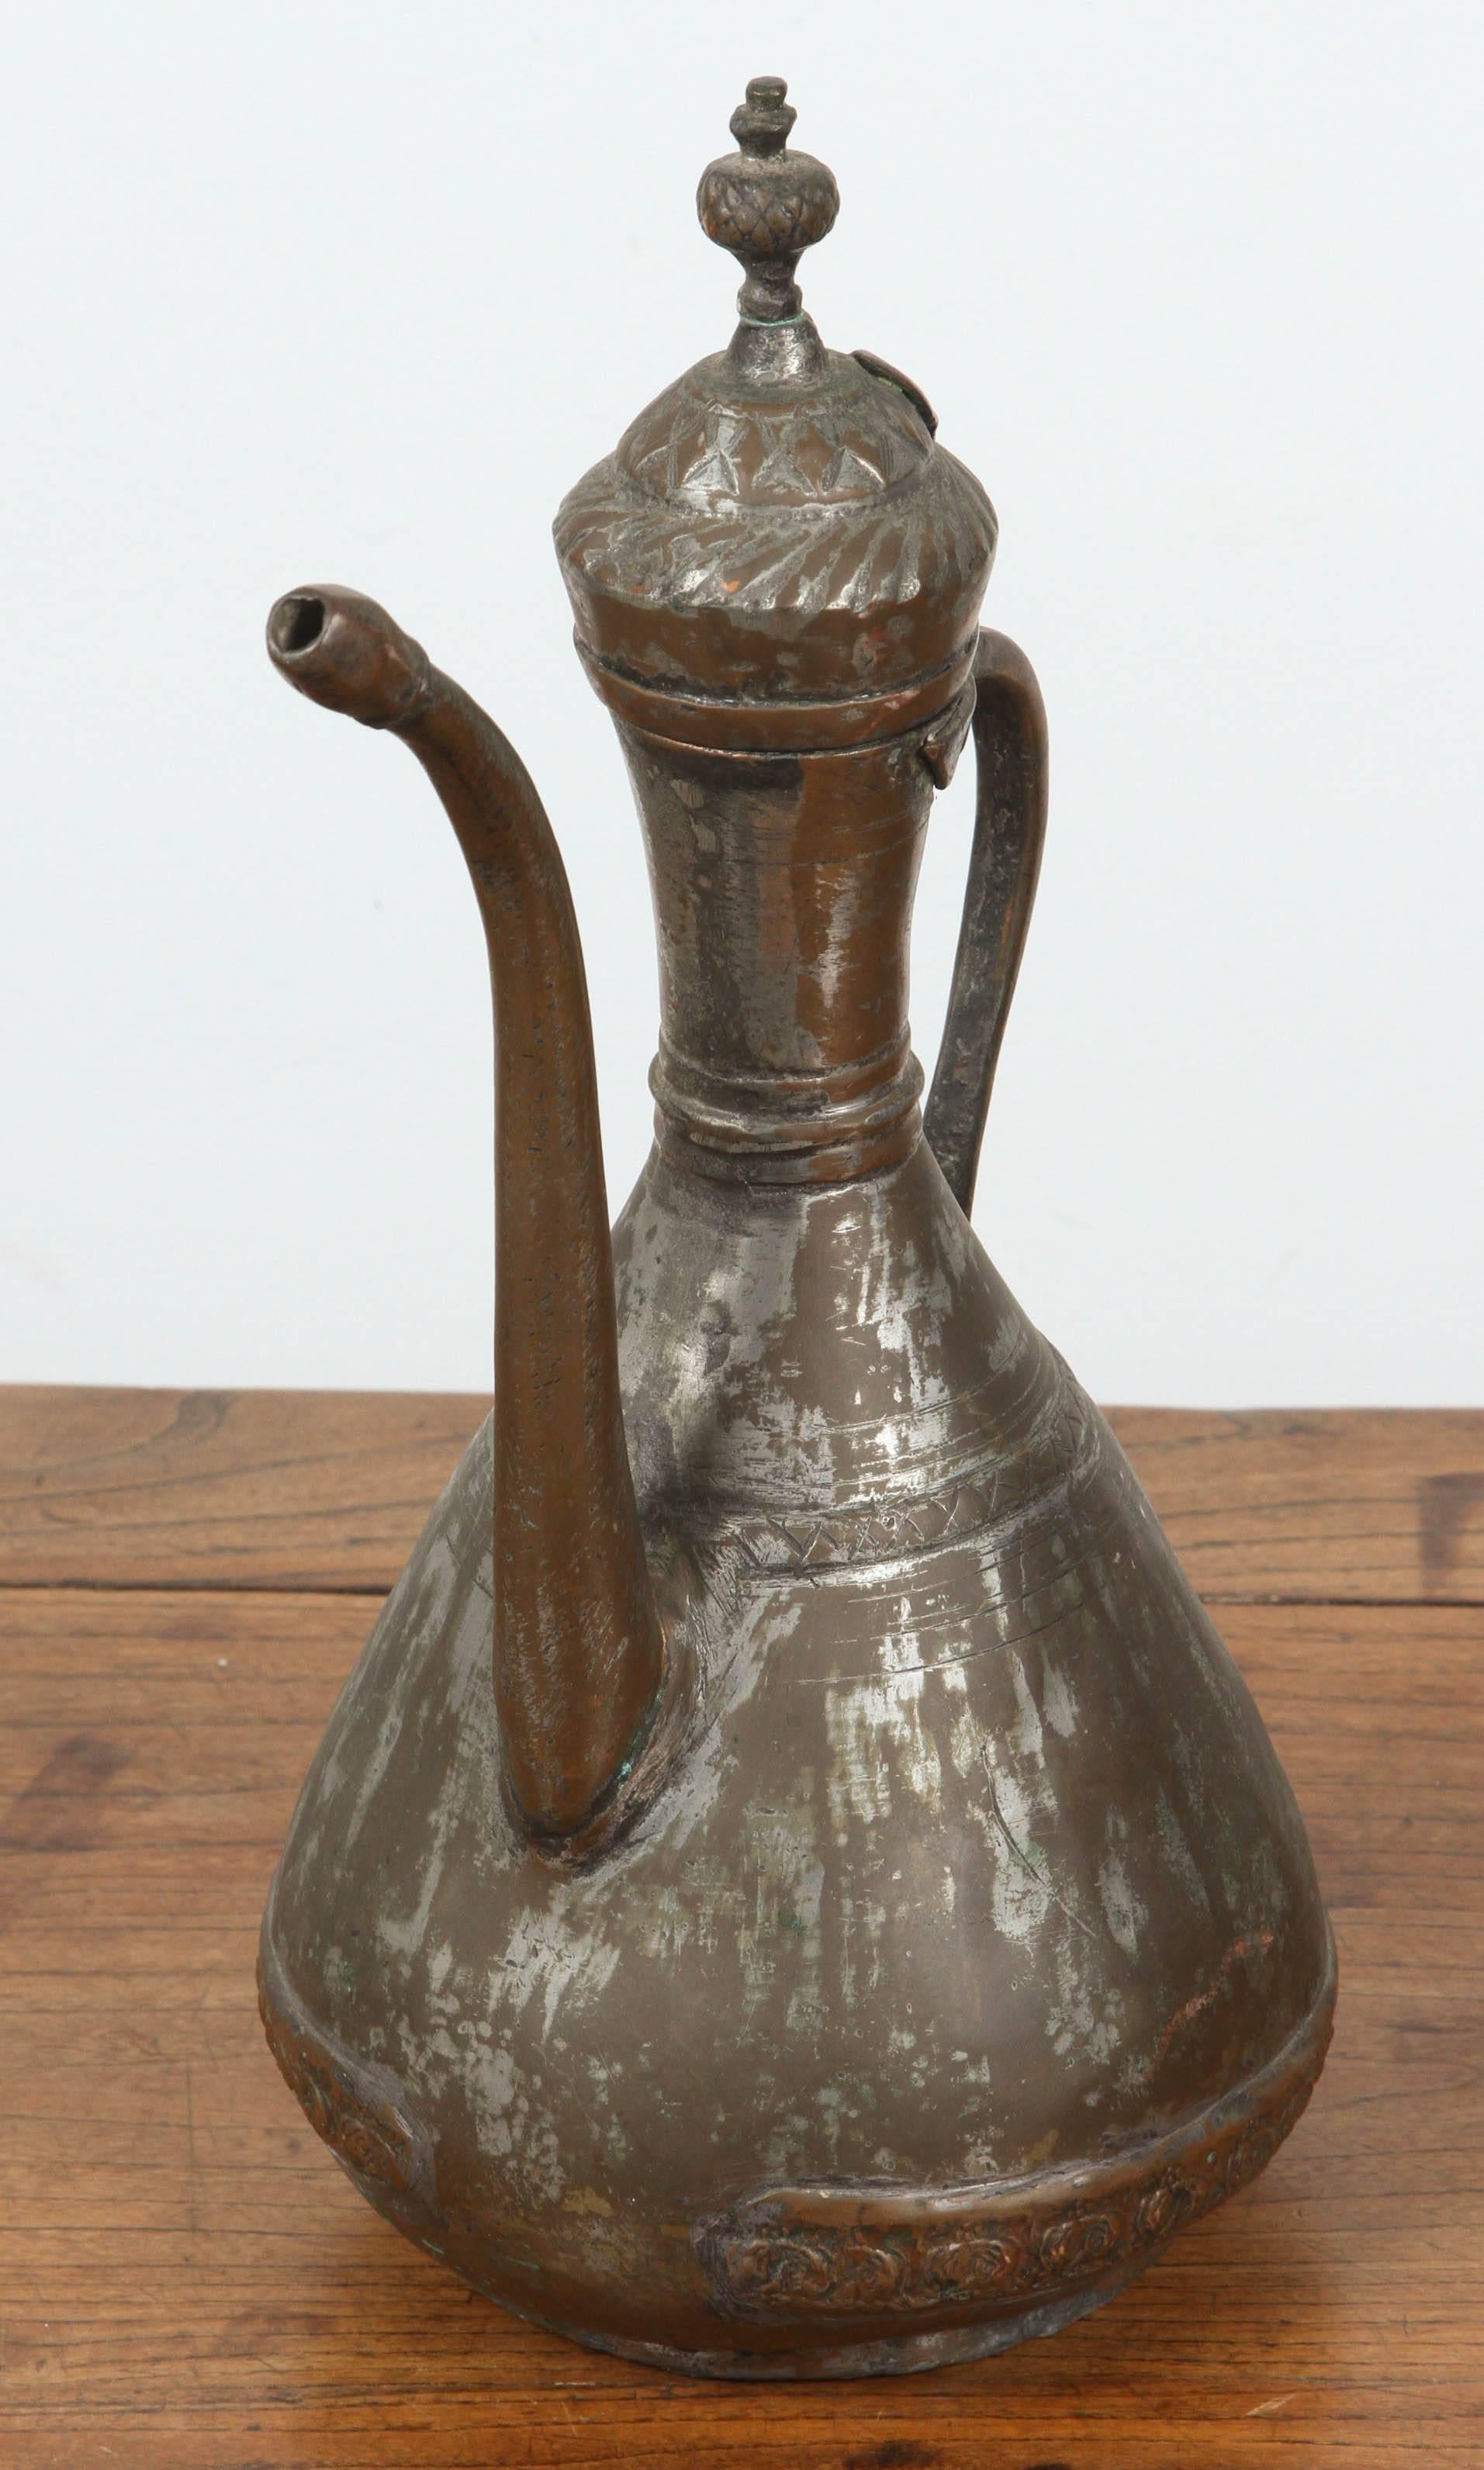 Antique Middle Eastern Turkish or Persian tinned copper ewer.
Nice decorative hand-hammered vessel, great antique patina.
Handcrafted Asian coffee pot or tea pot, tinned copper, great ethnic metalwork typical from the Middle East Moorish style.